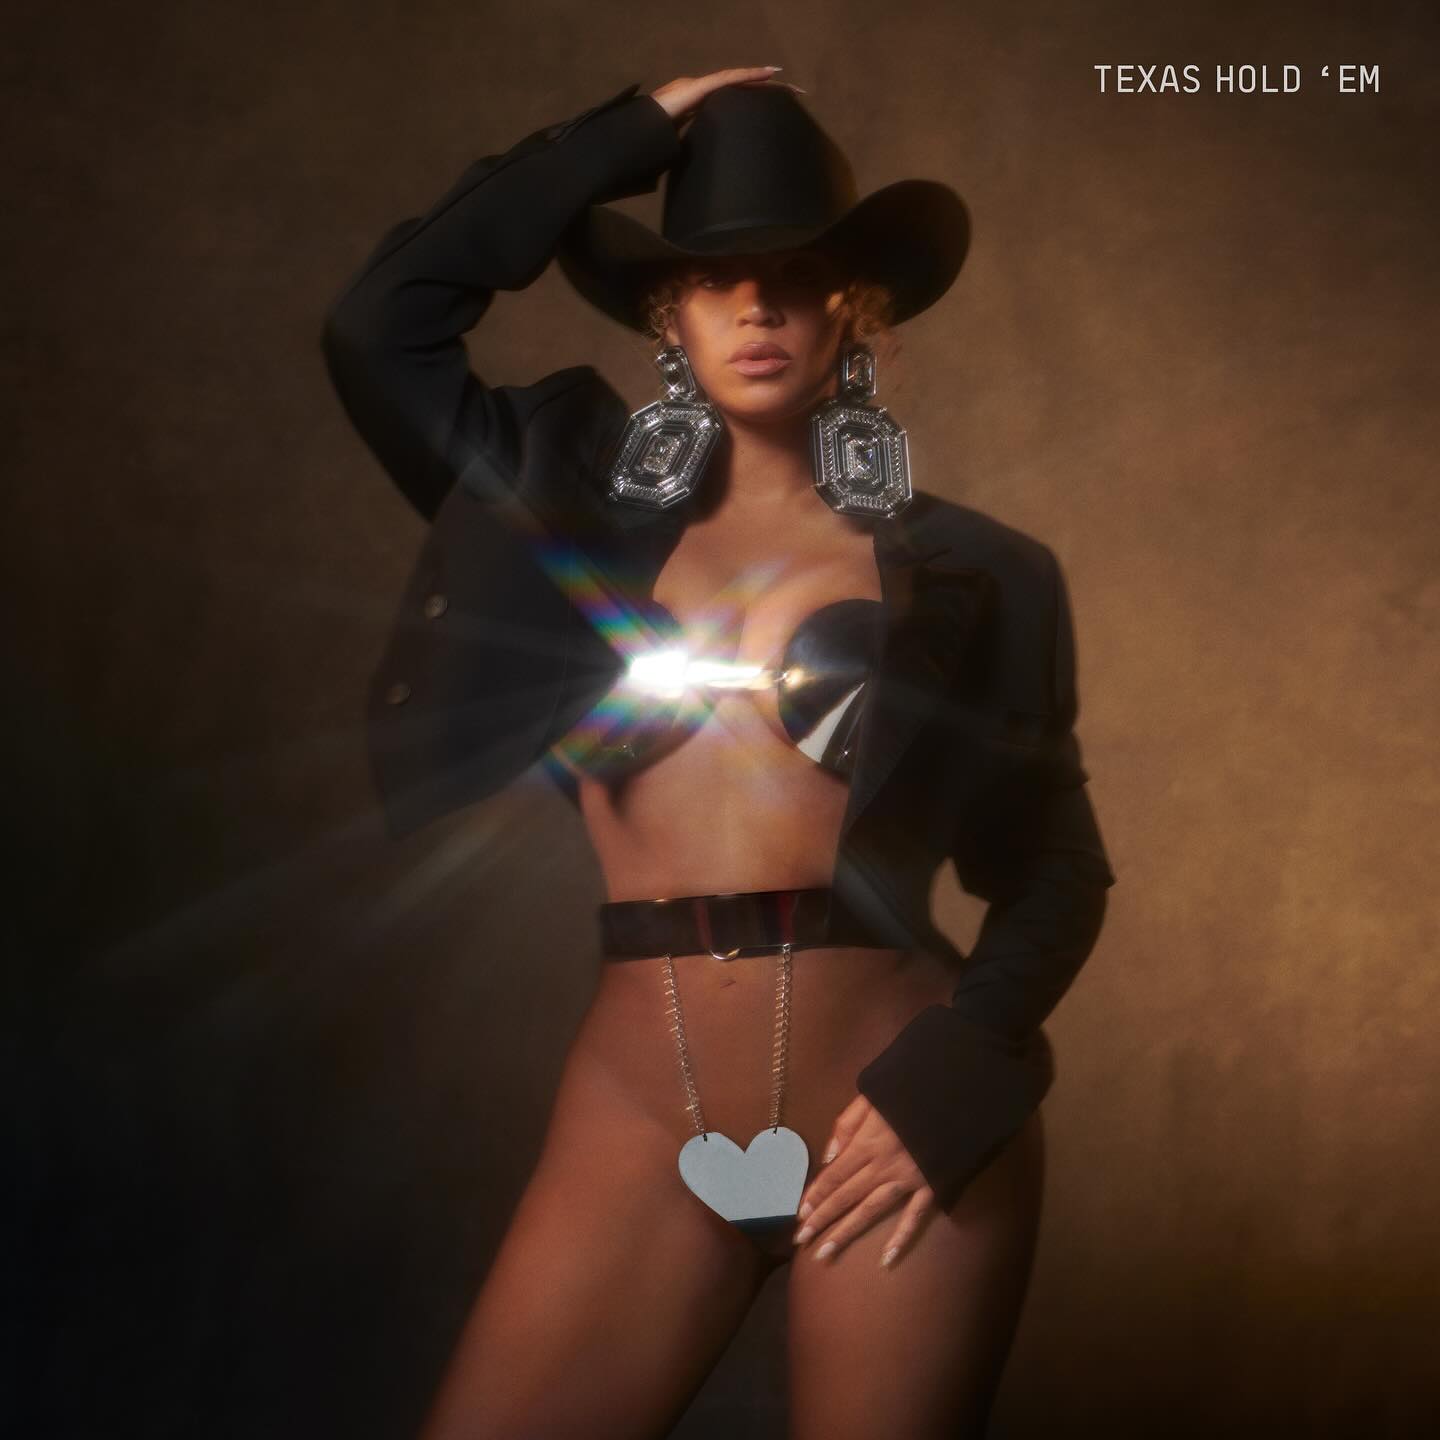 Beyonce bared it all for the cover of her new single, Texas Hold 'Em, which she released with 16 Carriages